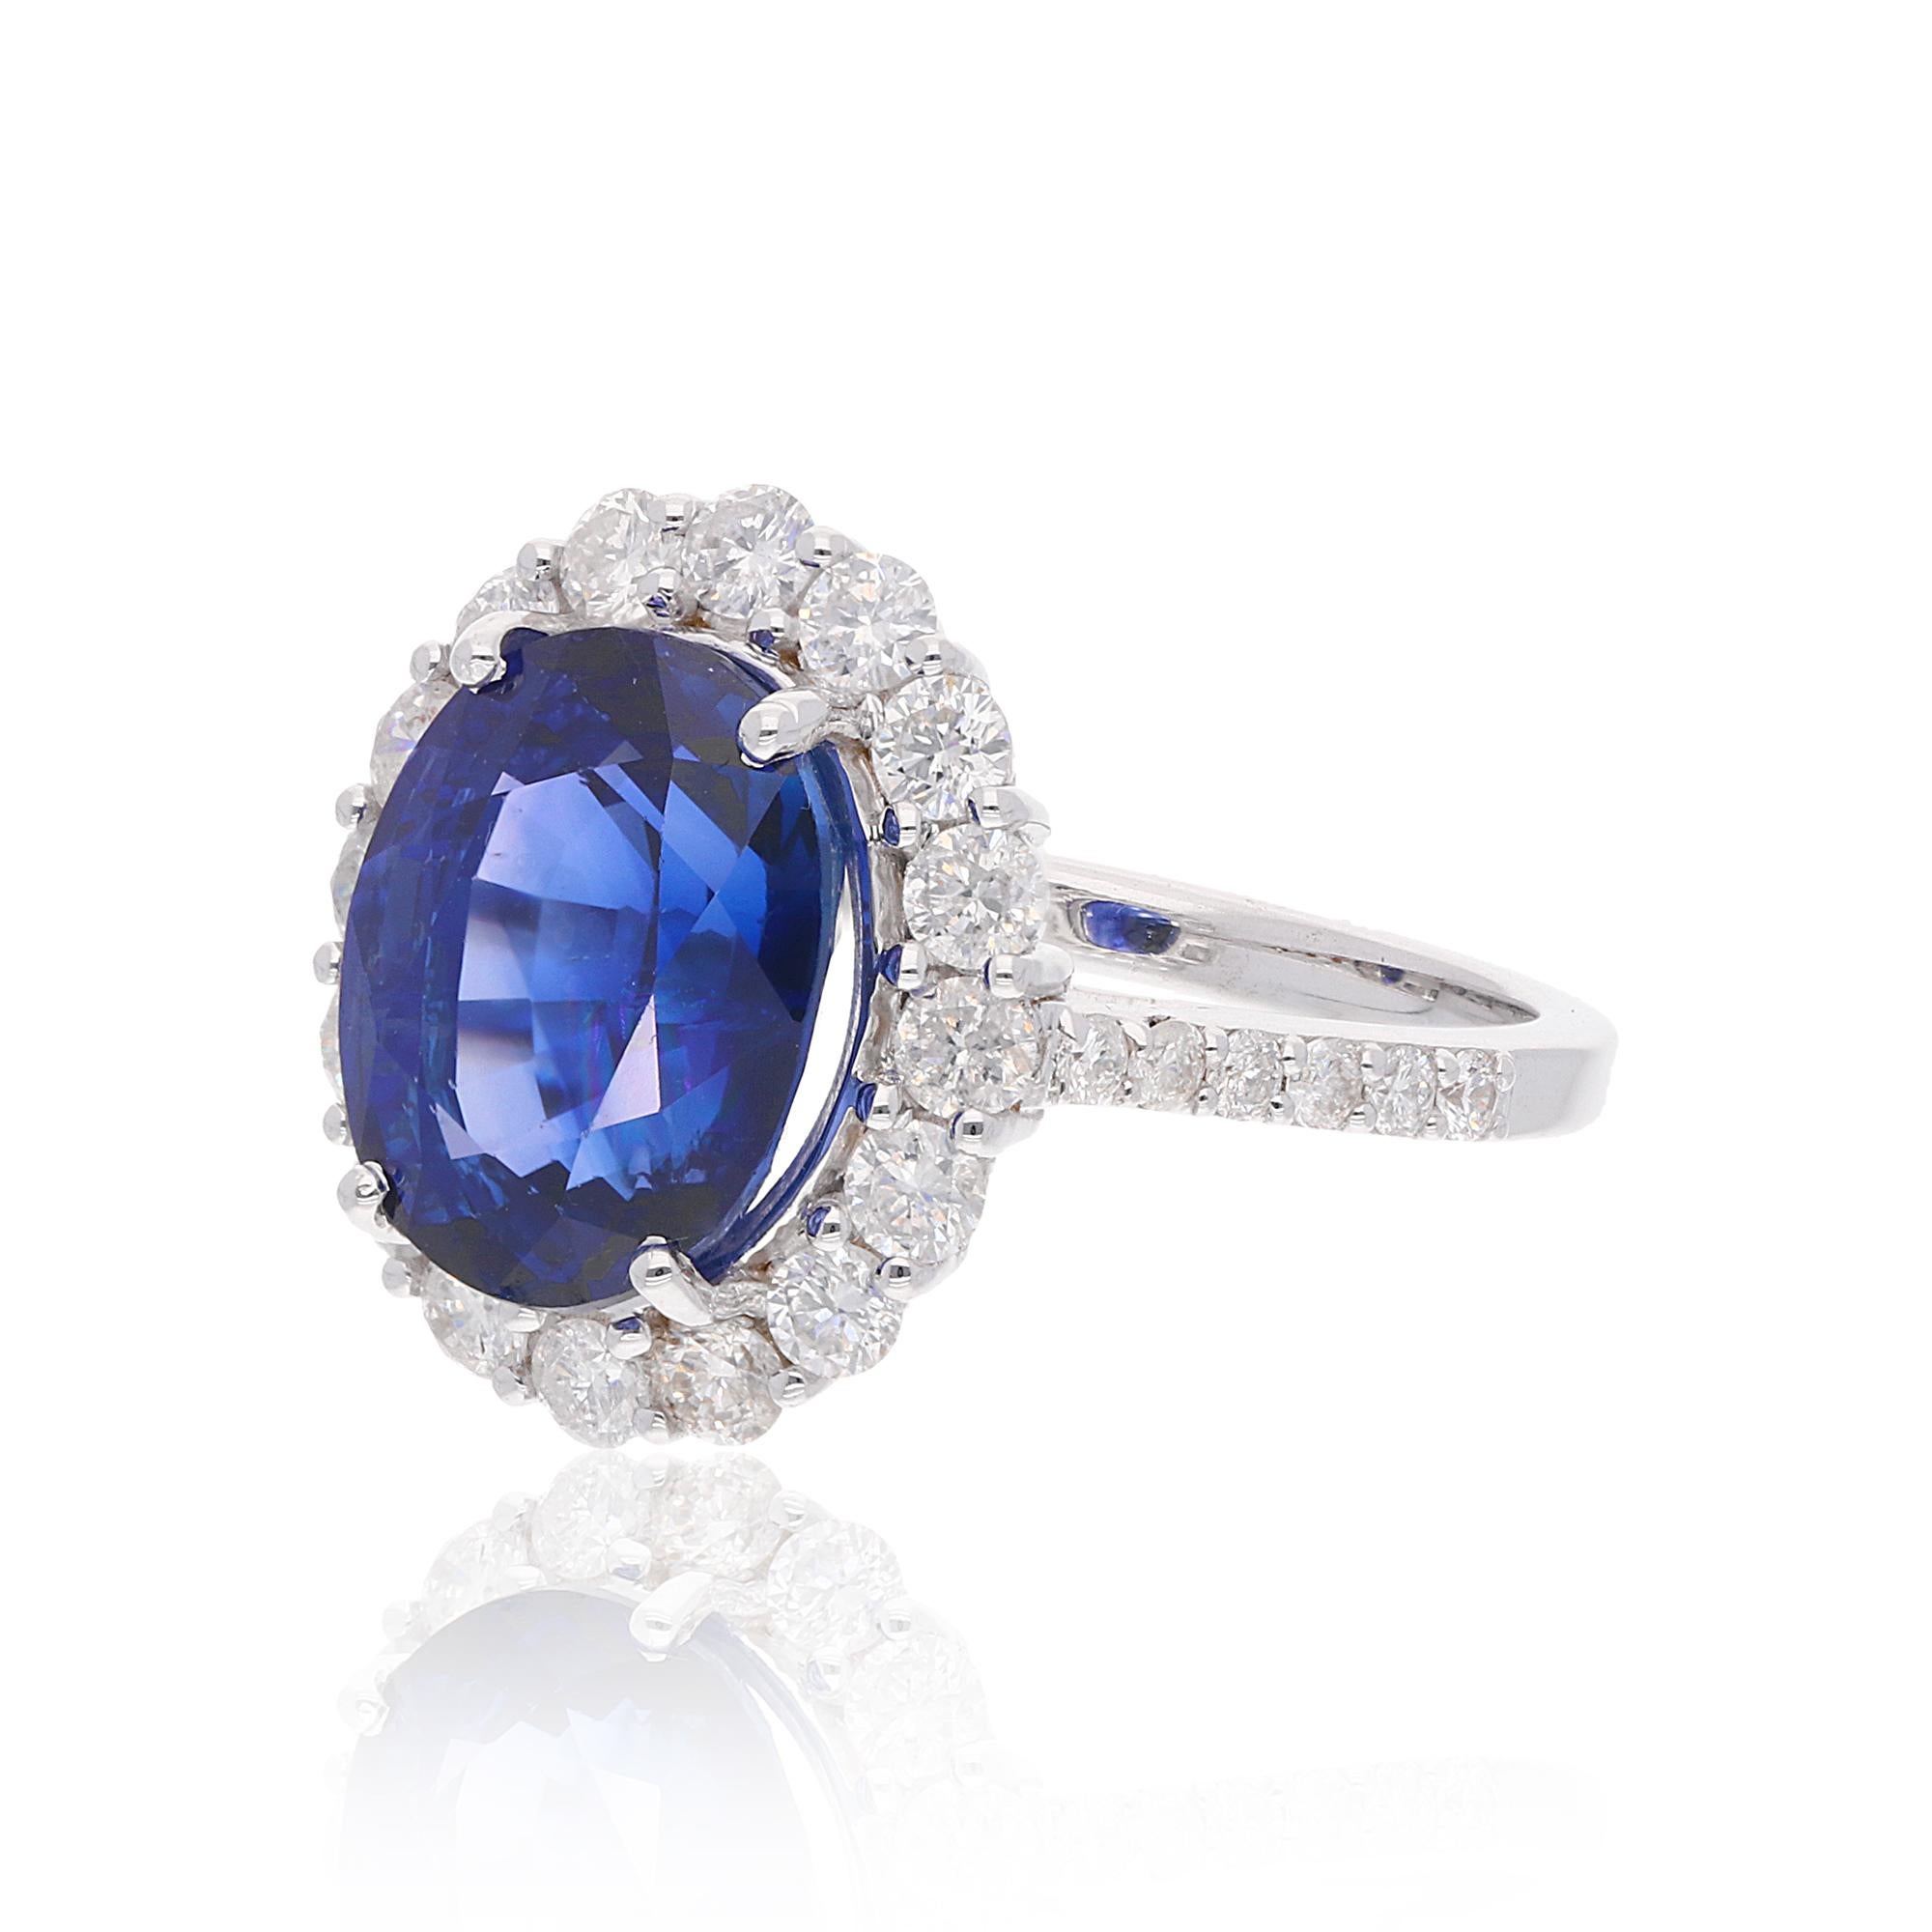 For Sale:  Oval Blue Sapphire Gemstone Ring SI Clarity HI Color Diamond 18 Karat White Gold 3